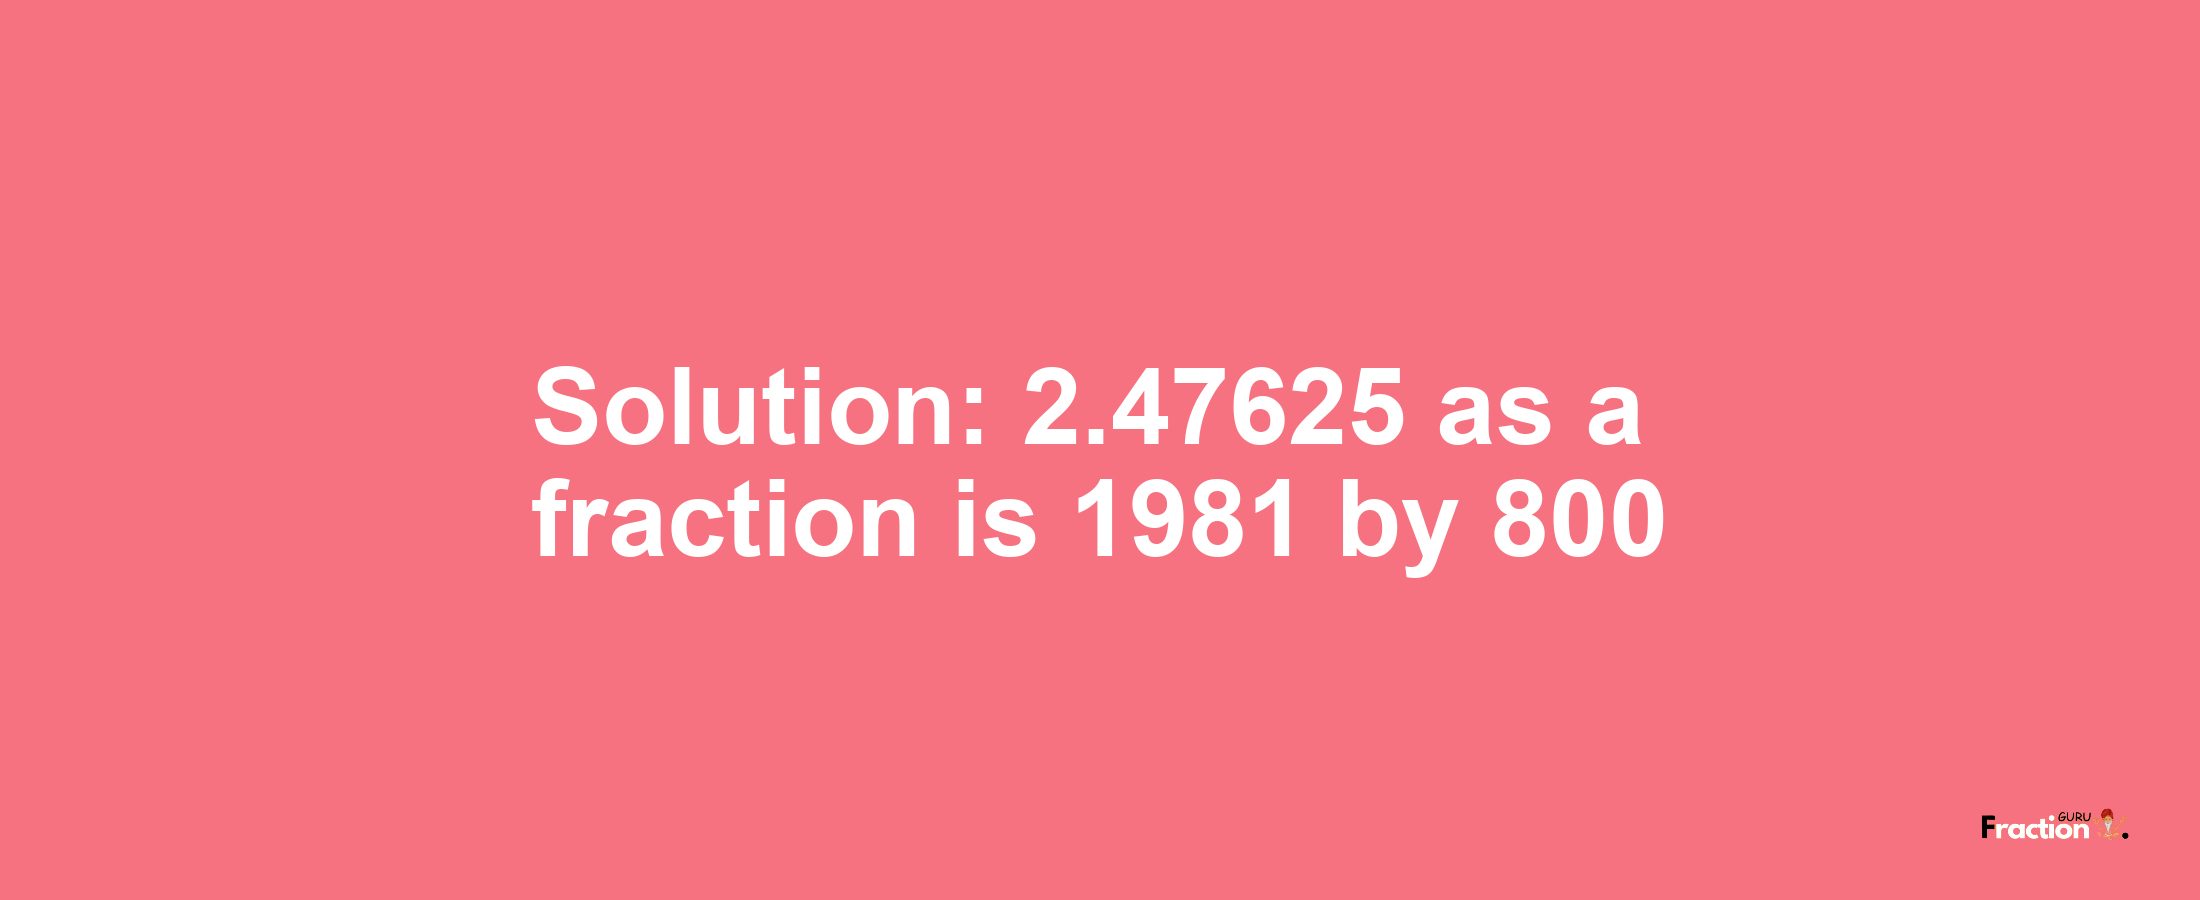 Solution:2.47625 as a fraction is 1981/800